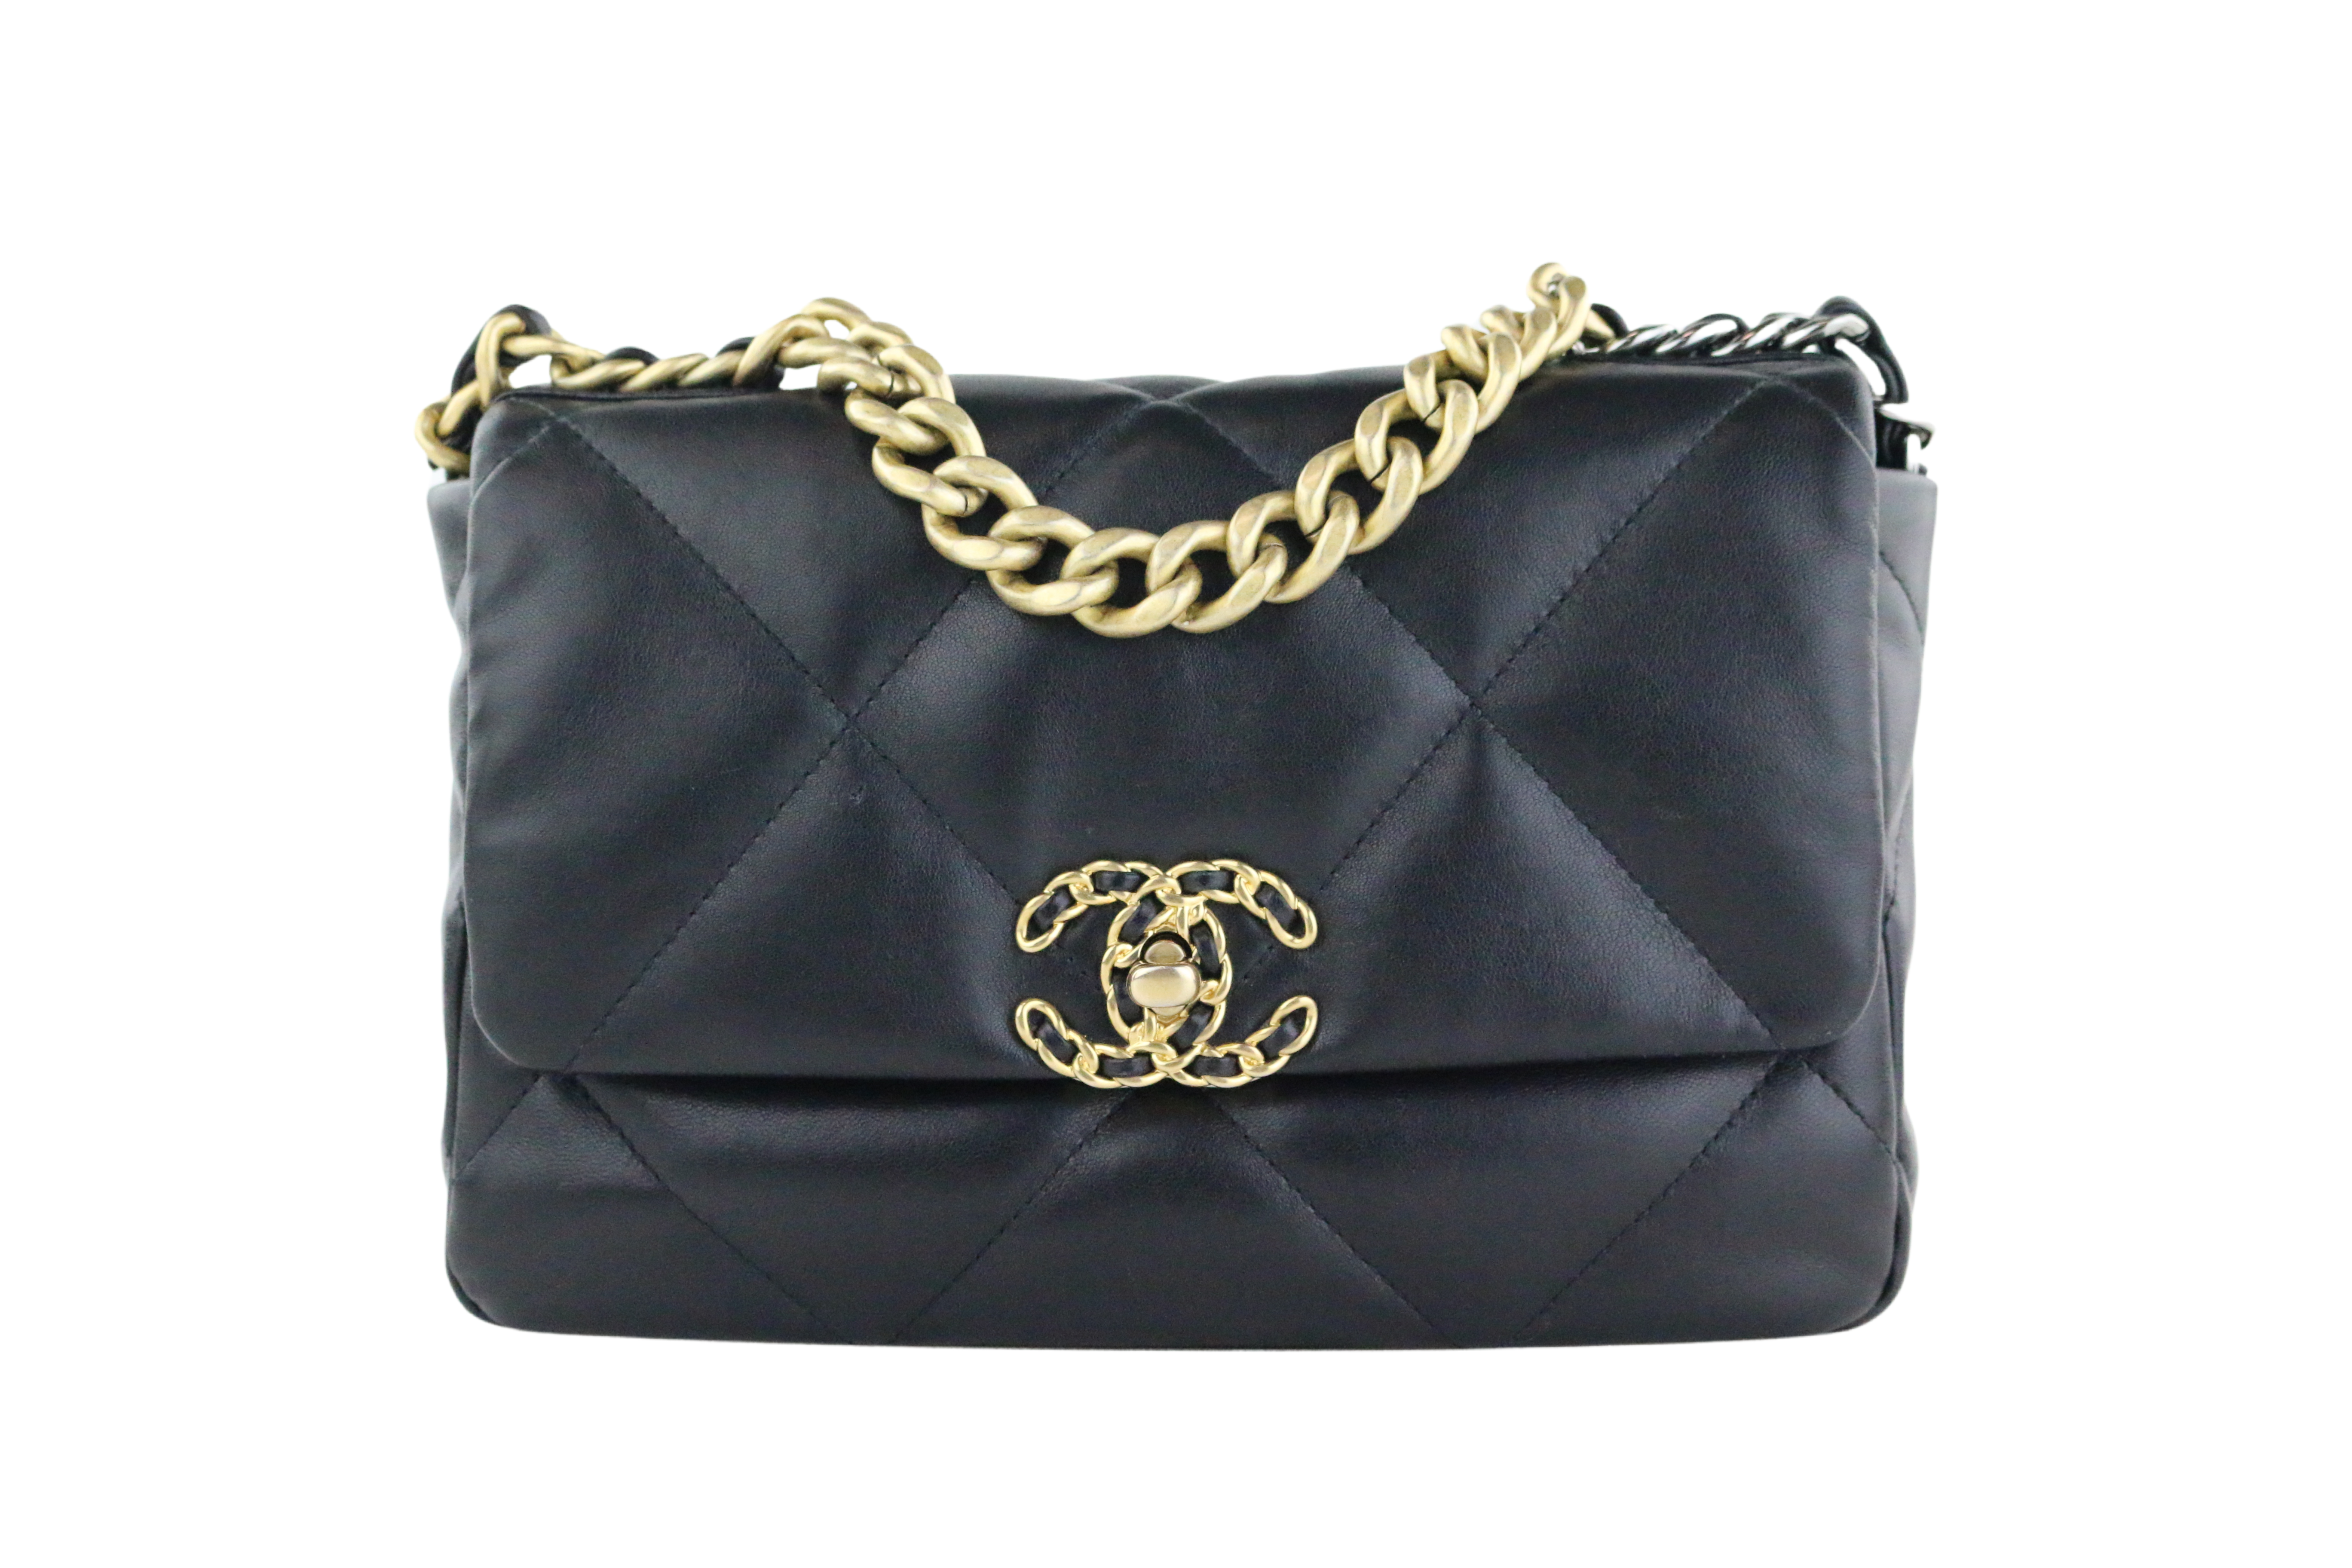 Chanel Shiny Goatskin Quilted Maxi Chanel 19 Flap Black